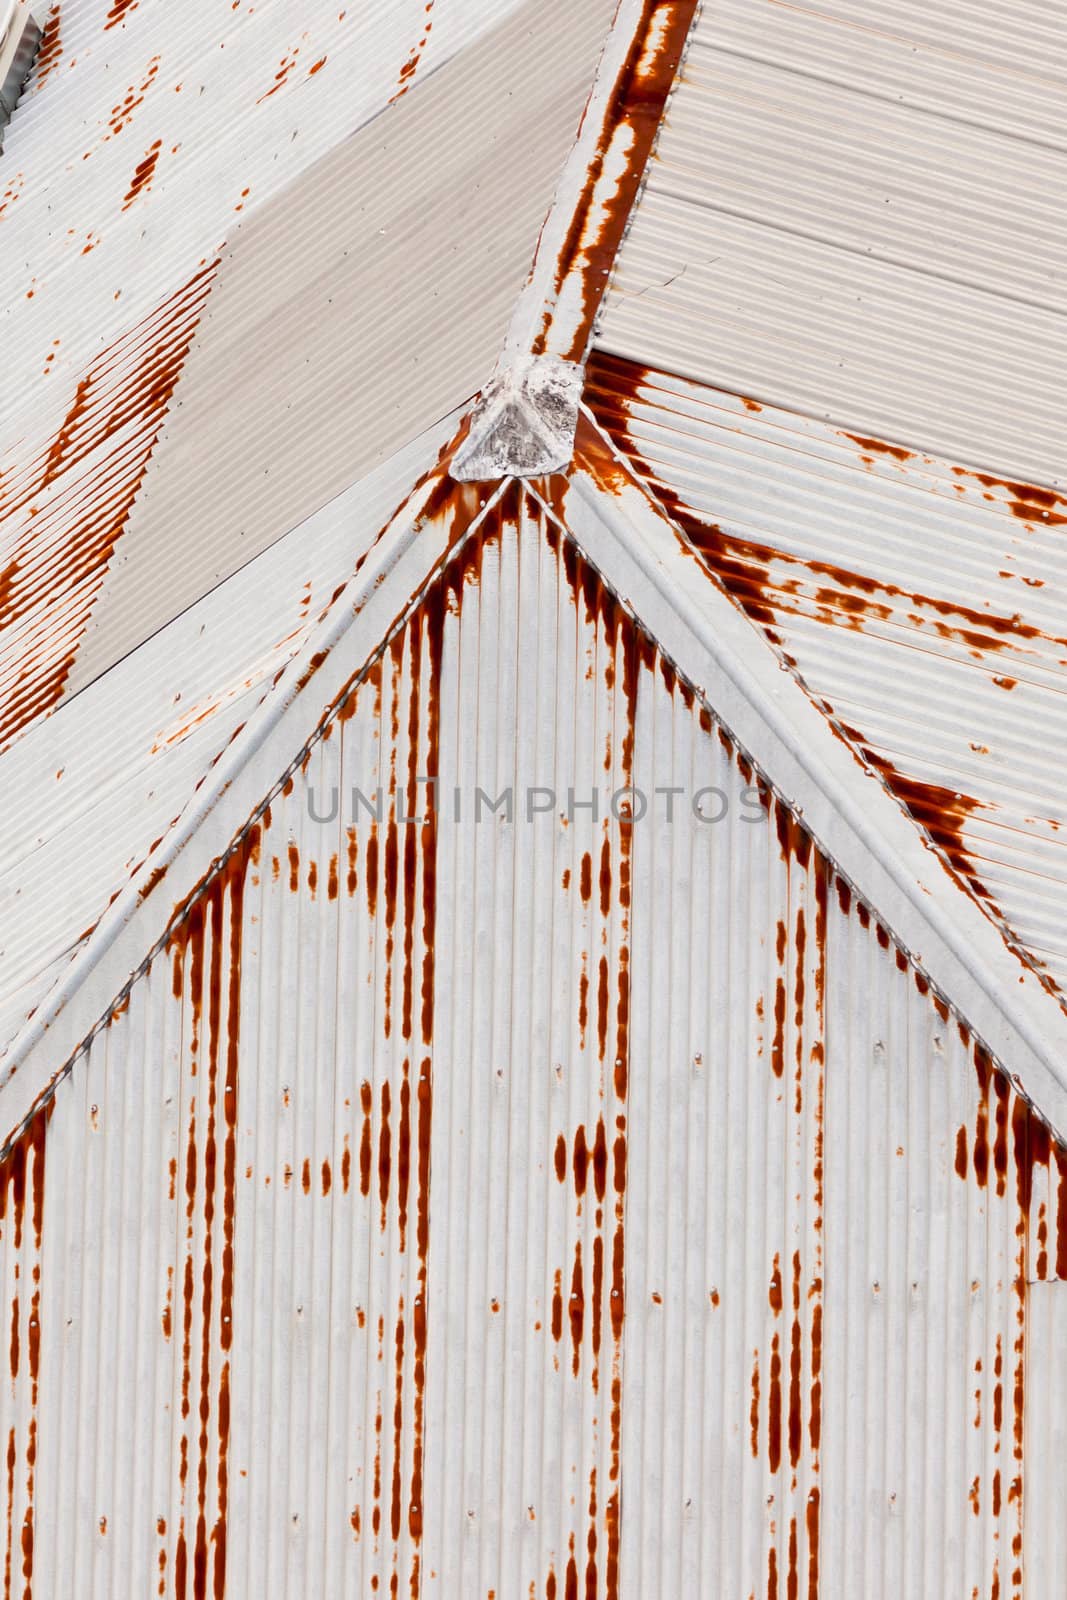 Abstract background texturte pattern of grungy rusting metal roof and galvanised metal clad building